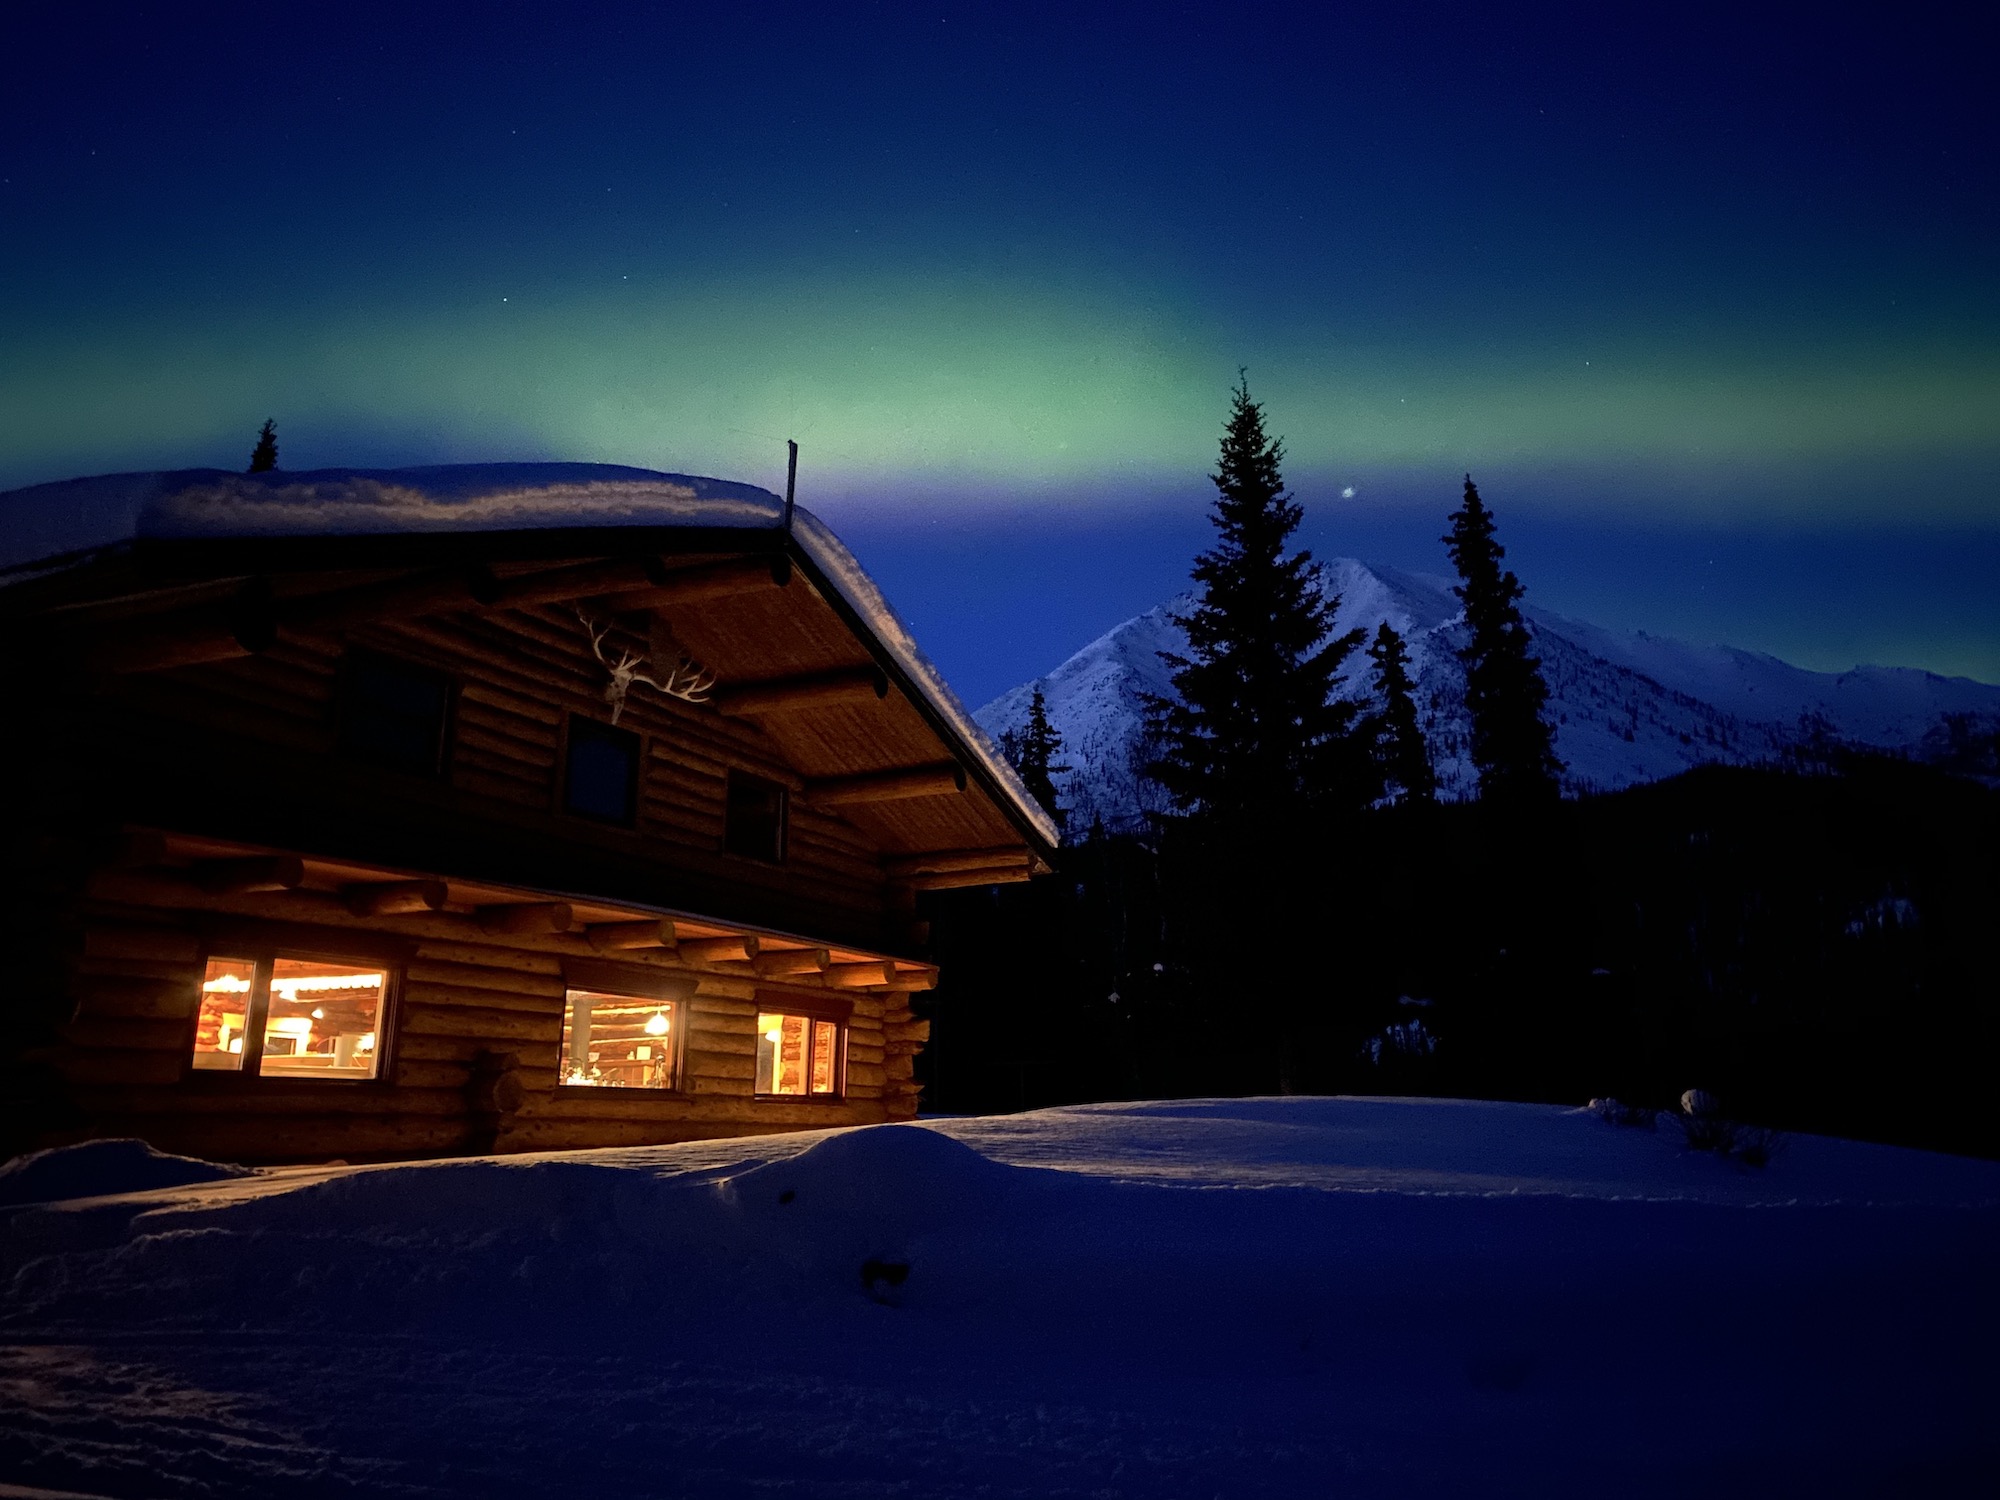 Lights from inside a log building illuminate snow in the foreground at night. A clear sky features a green aurora borealis. A snowy mountain rises in the background.